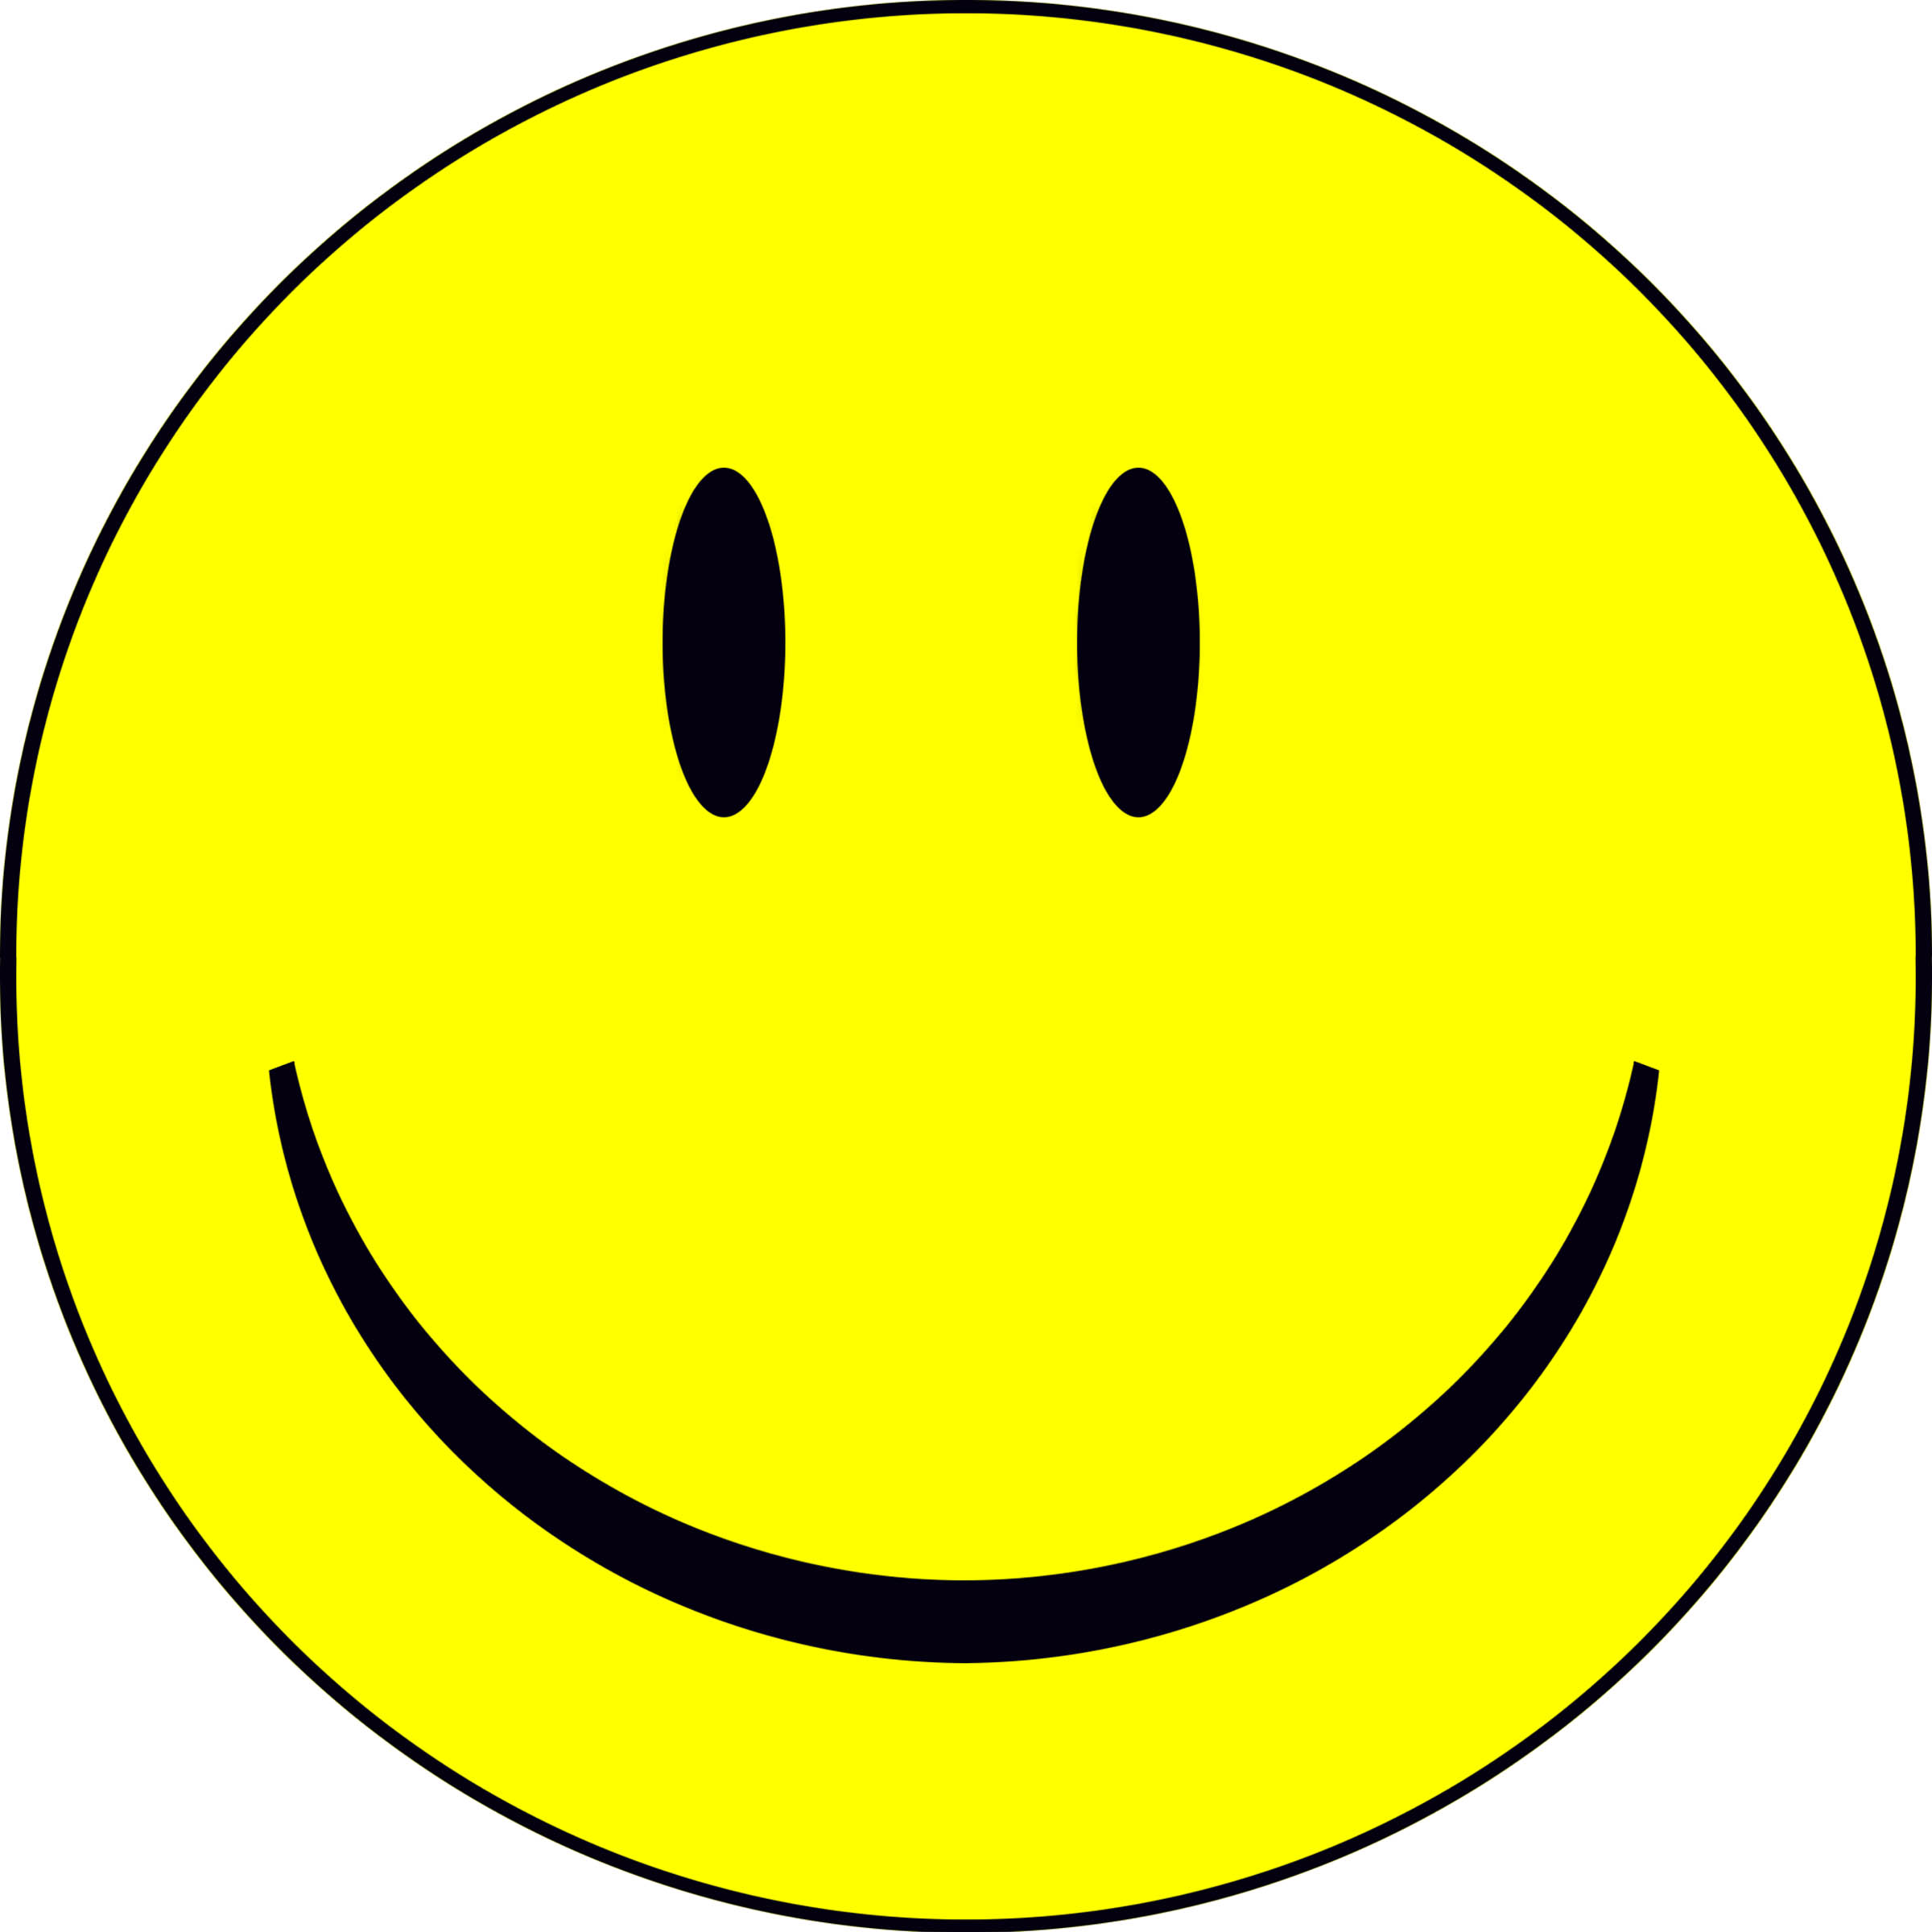 Image Of A Smiling Face - Clipart library